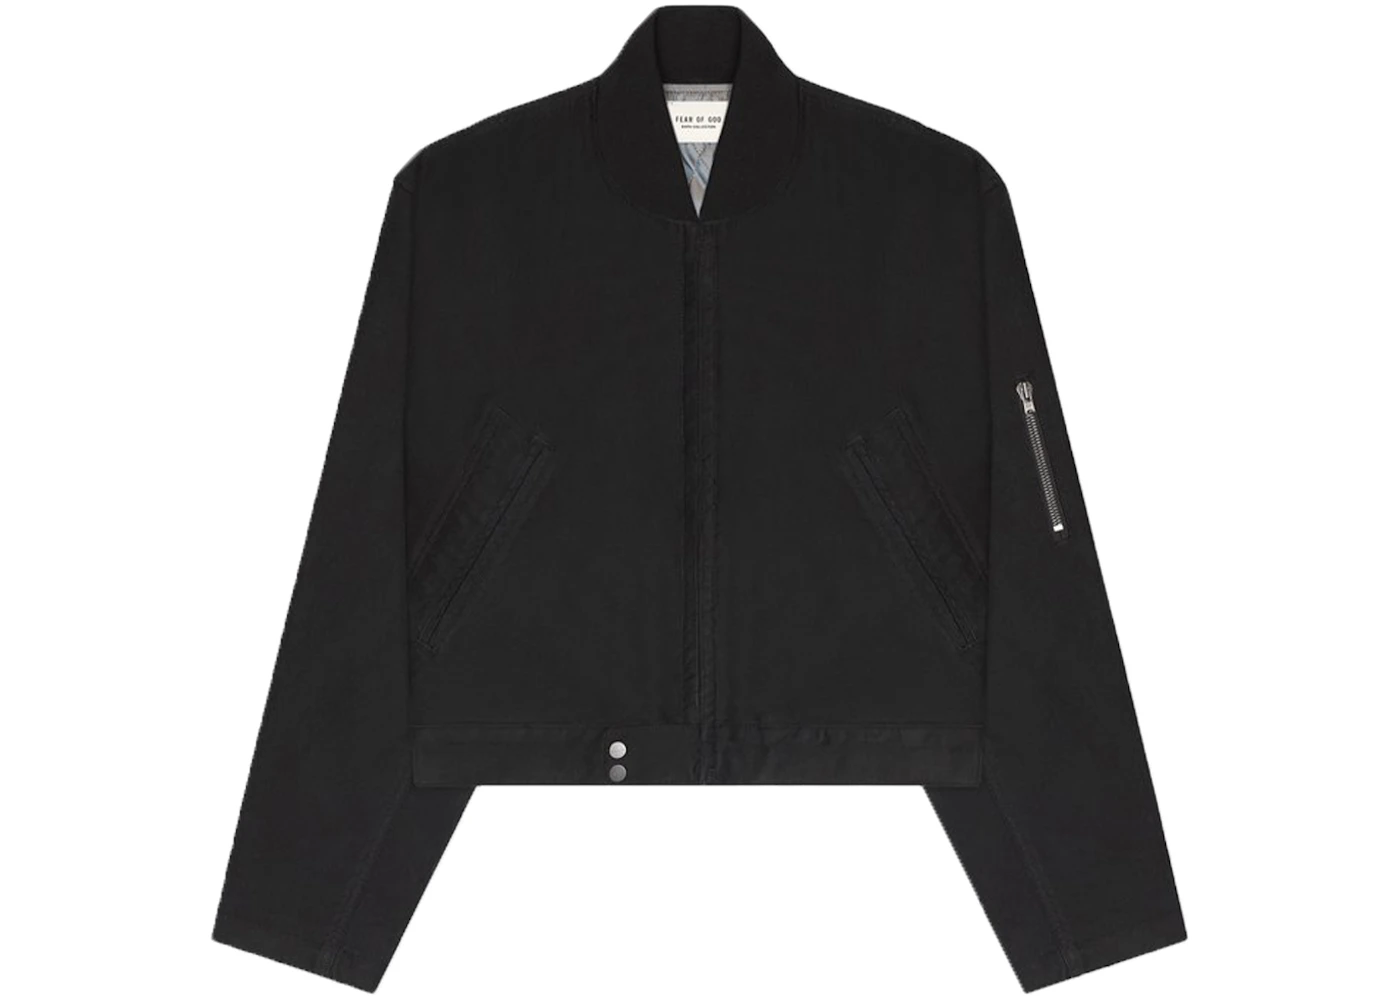 FEAR OF GOD Cotton Bomber Jacket Black - Sixth Collection - US